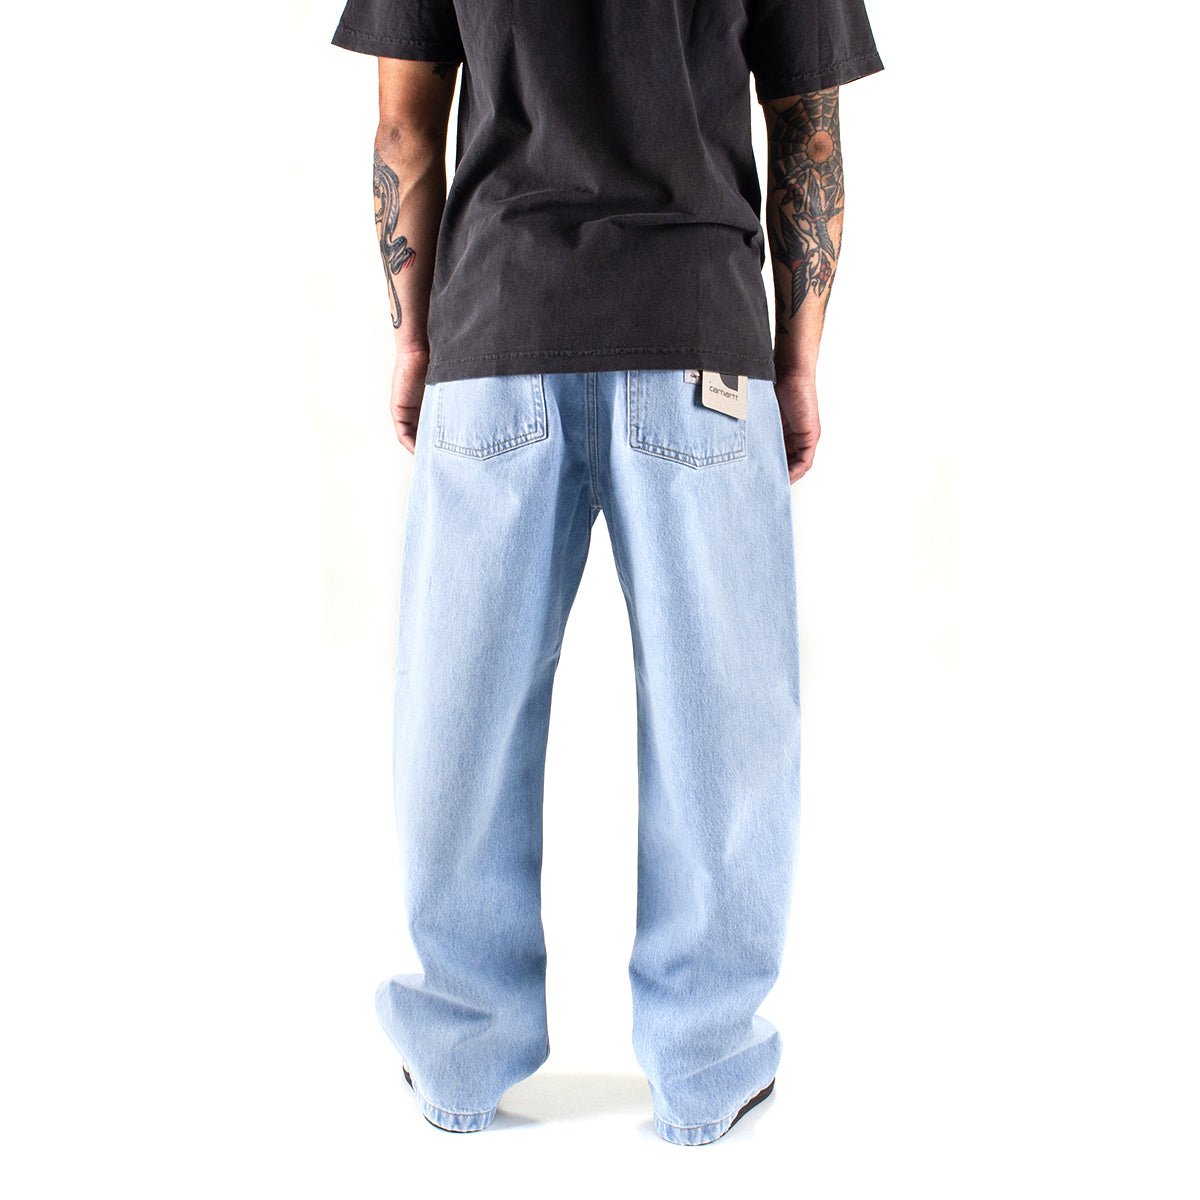 Carhartt WIP | Brandon Pant Style # I031246-01A3 Color : Blue (Heavy Stone Bleached)